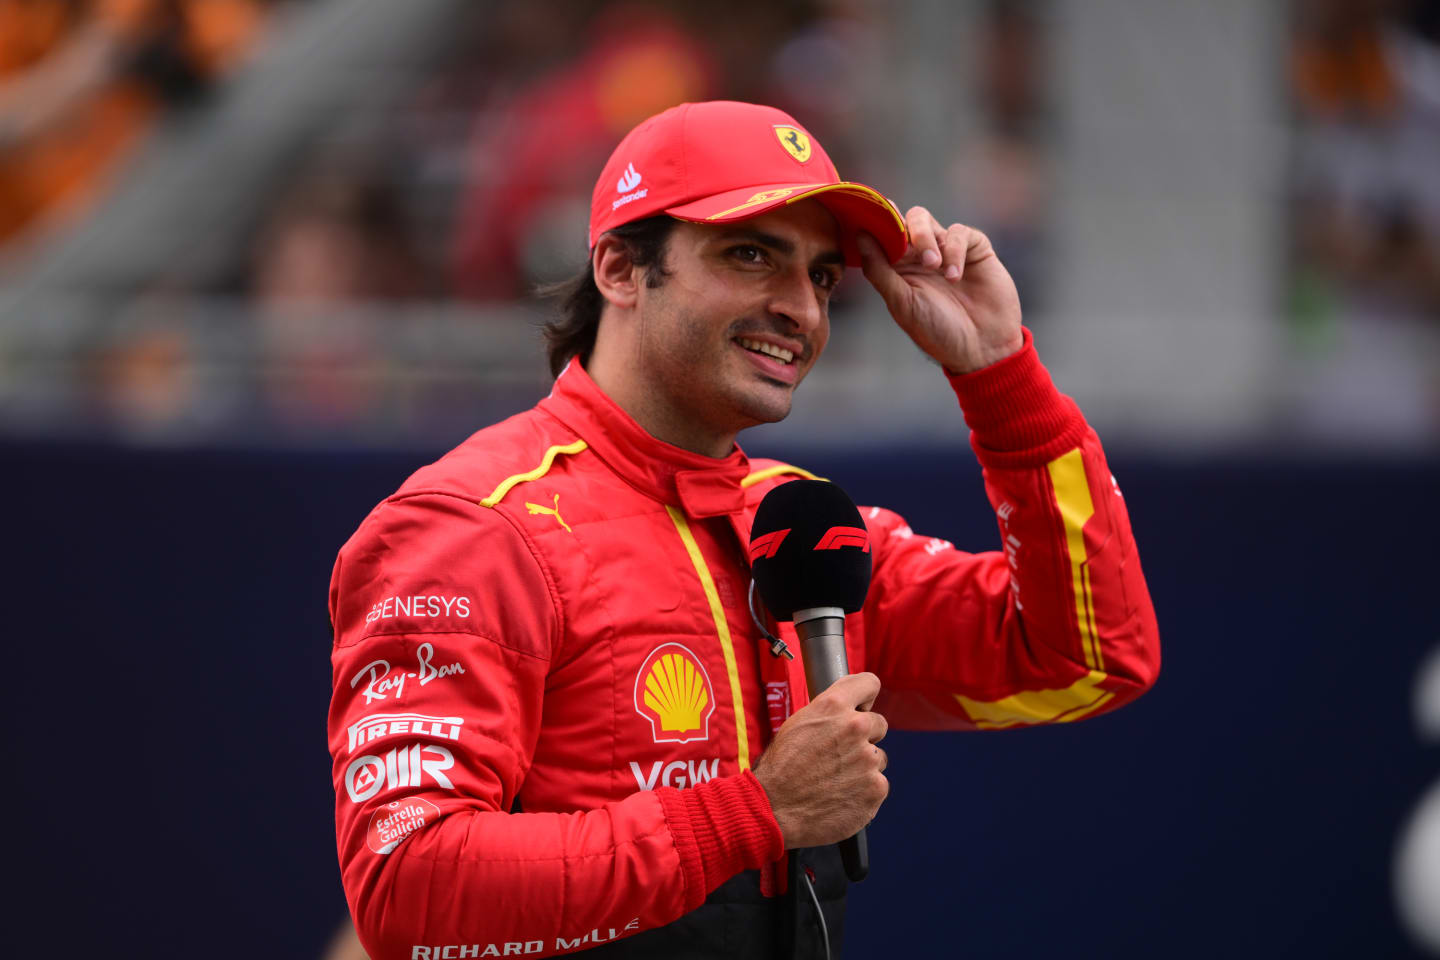 Carlos Sainz of Scuderia Mission Winnow Ferrari celebrate and say hello to the fans during qualifying of Spanish GP, 8th round of FIA Formula 1 World Championship in Circuit de Catalunya, Montmelo, Catalunya, Spain, 03/06/23 (Photo by Andrea Diodato/NurPhoto via Getty Images)